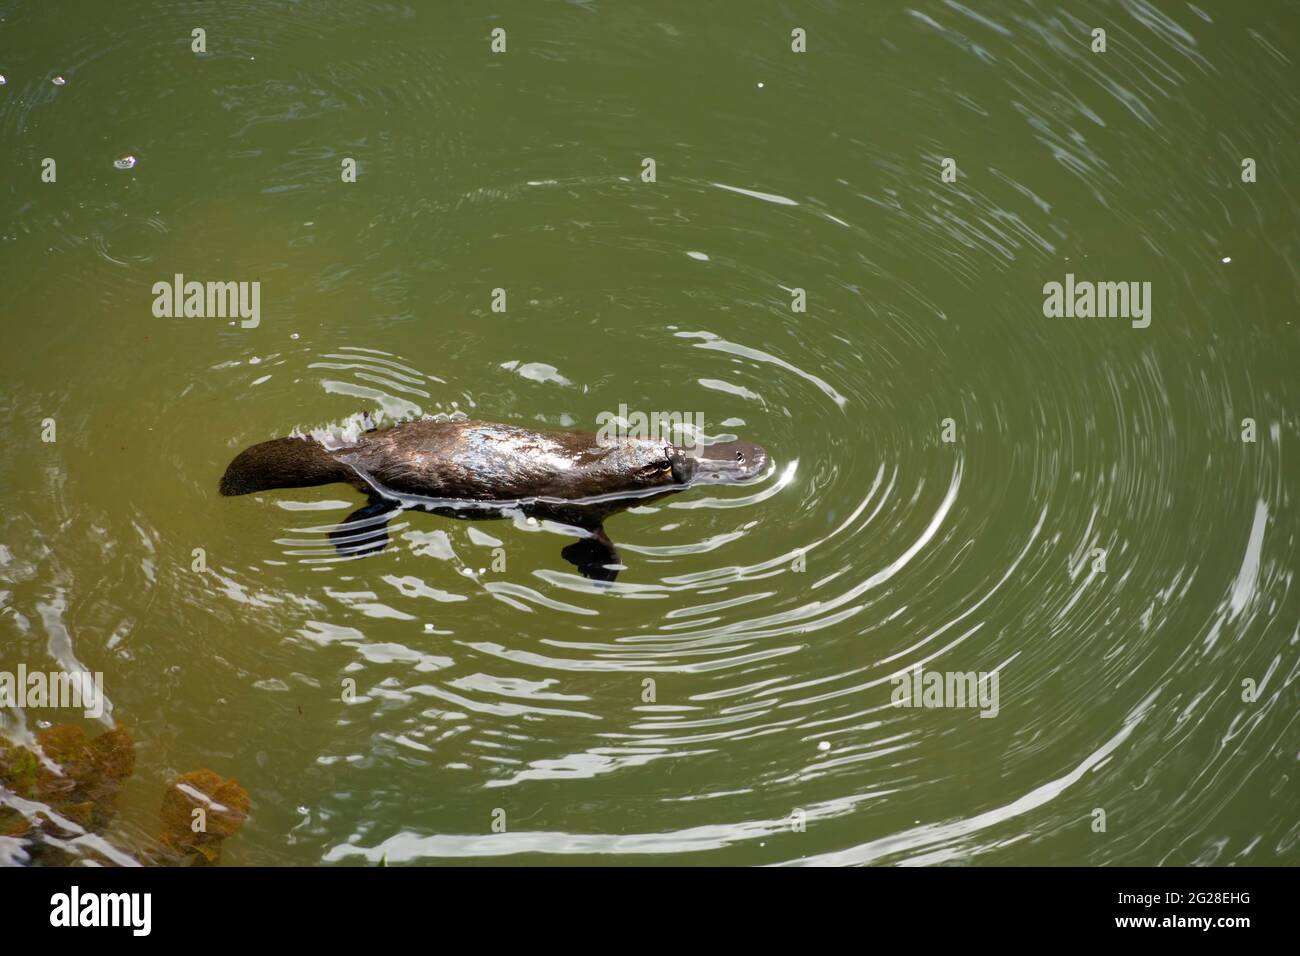 Australian platypus (Ornithorhynchus anatinus) with its bill and webbed feet like a duck and the fur of an otter is a semi-aquatic egg laying mammal. Stock Photo